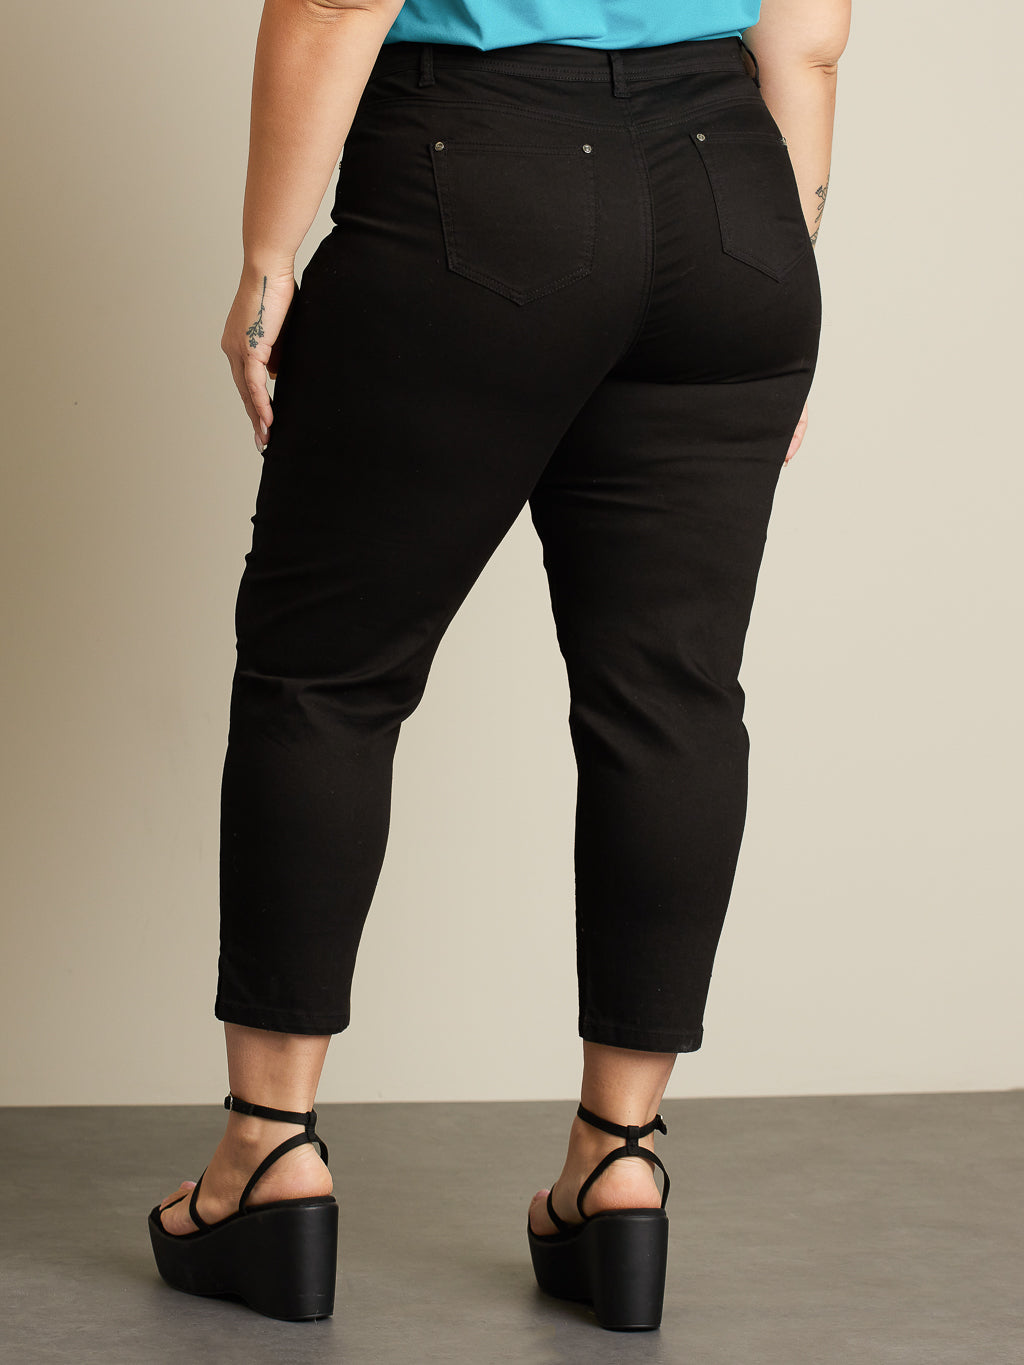 Semi-fitted relaxed pant